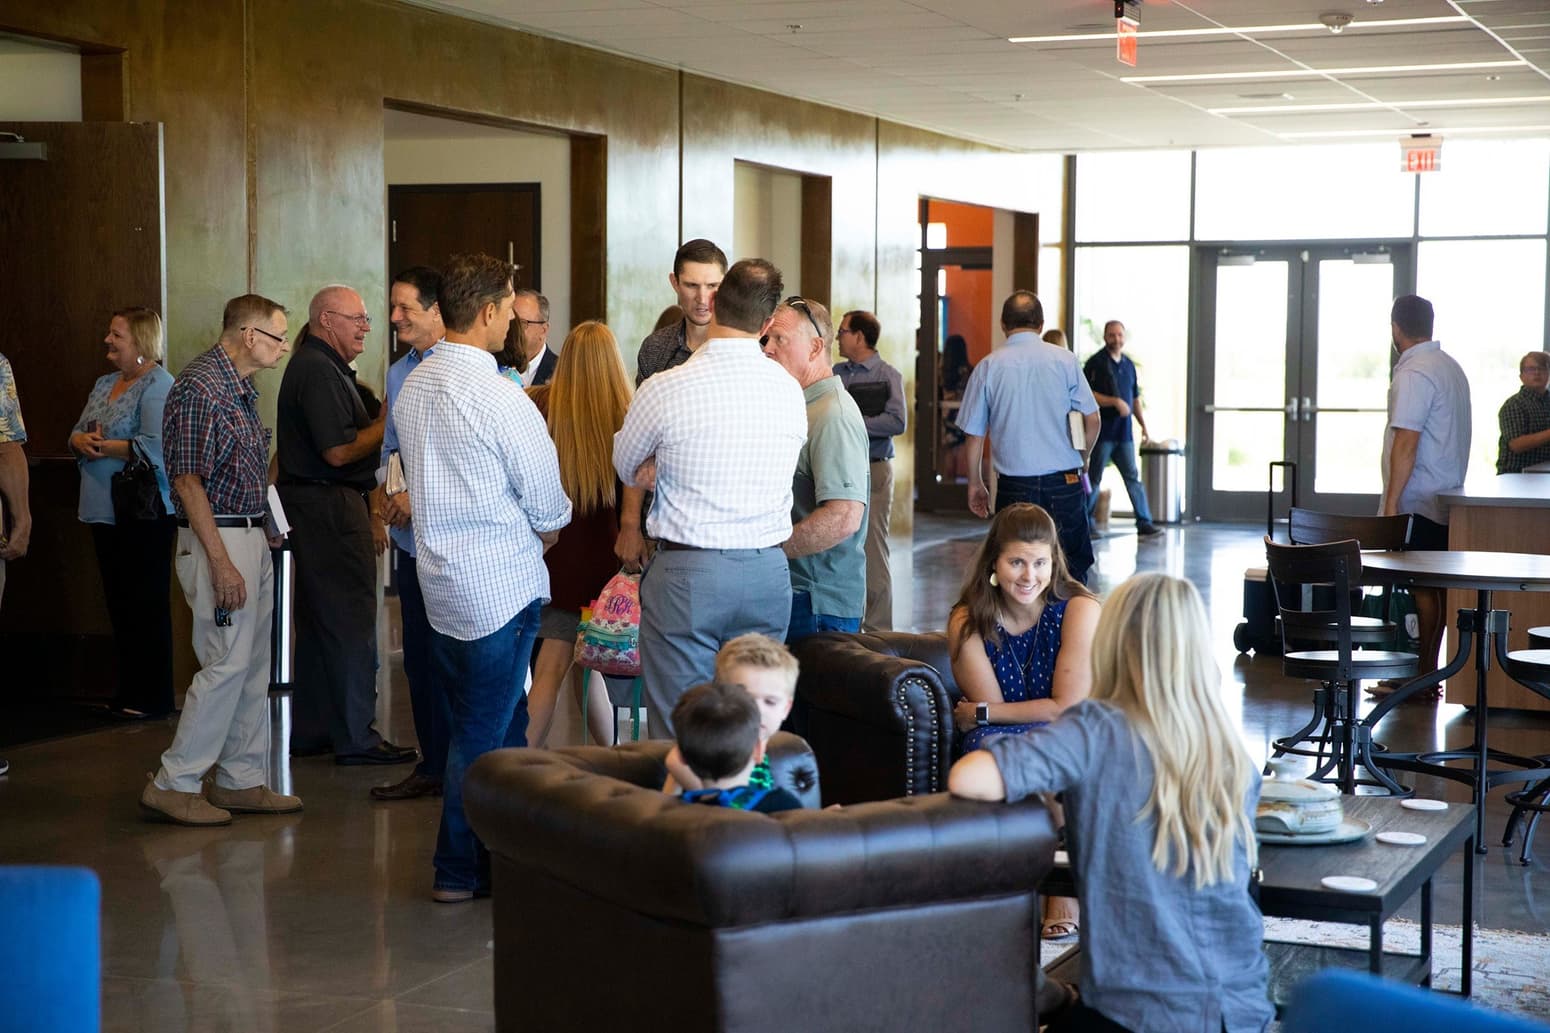 After the Cross Church remodel, members have more space to socialize.